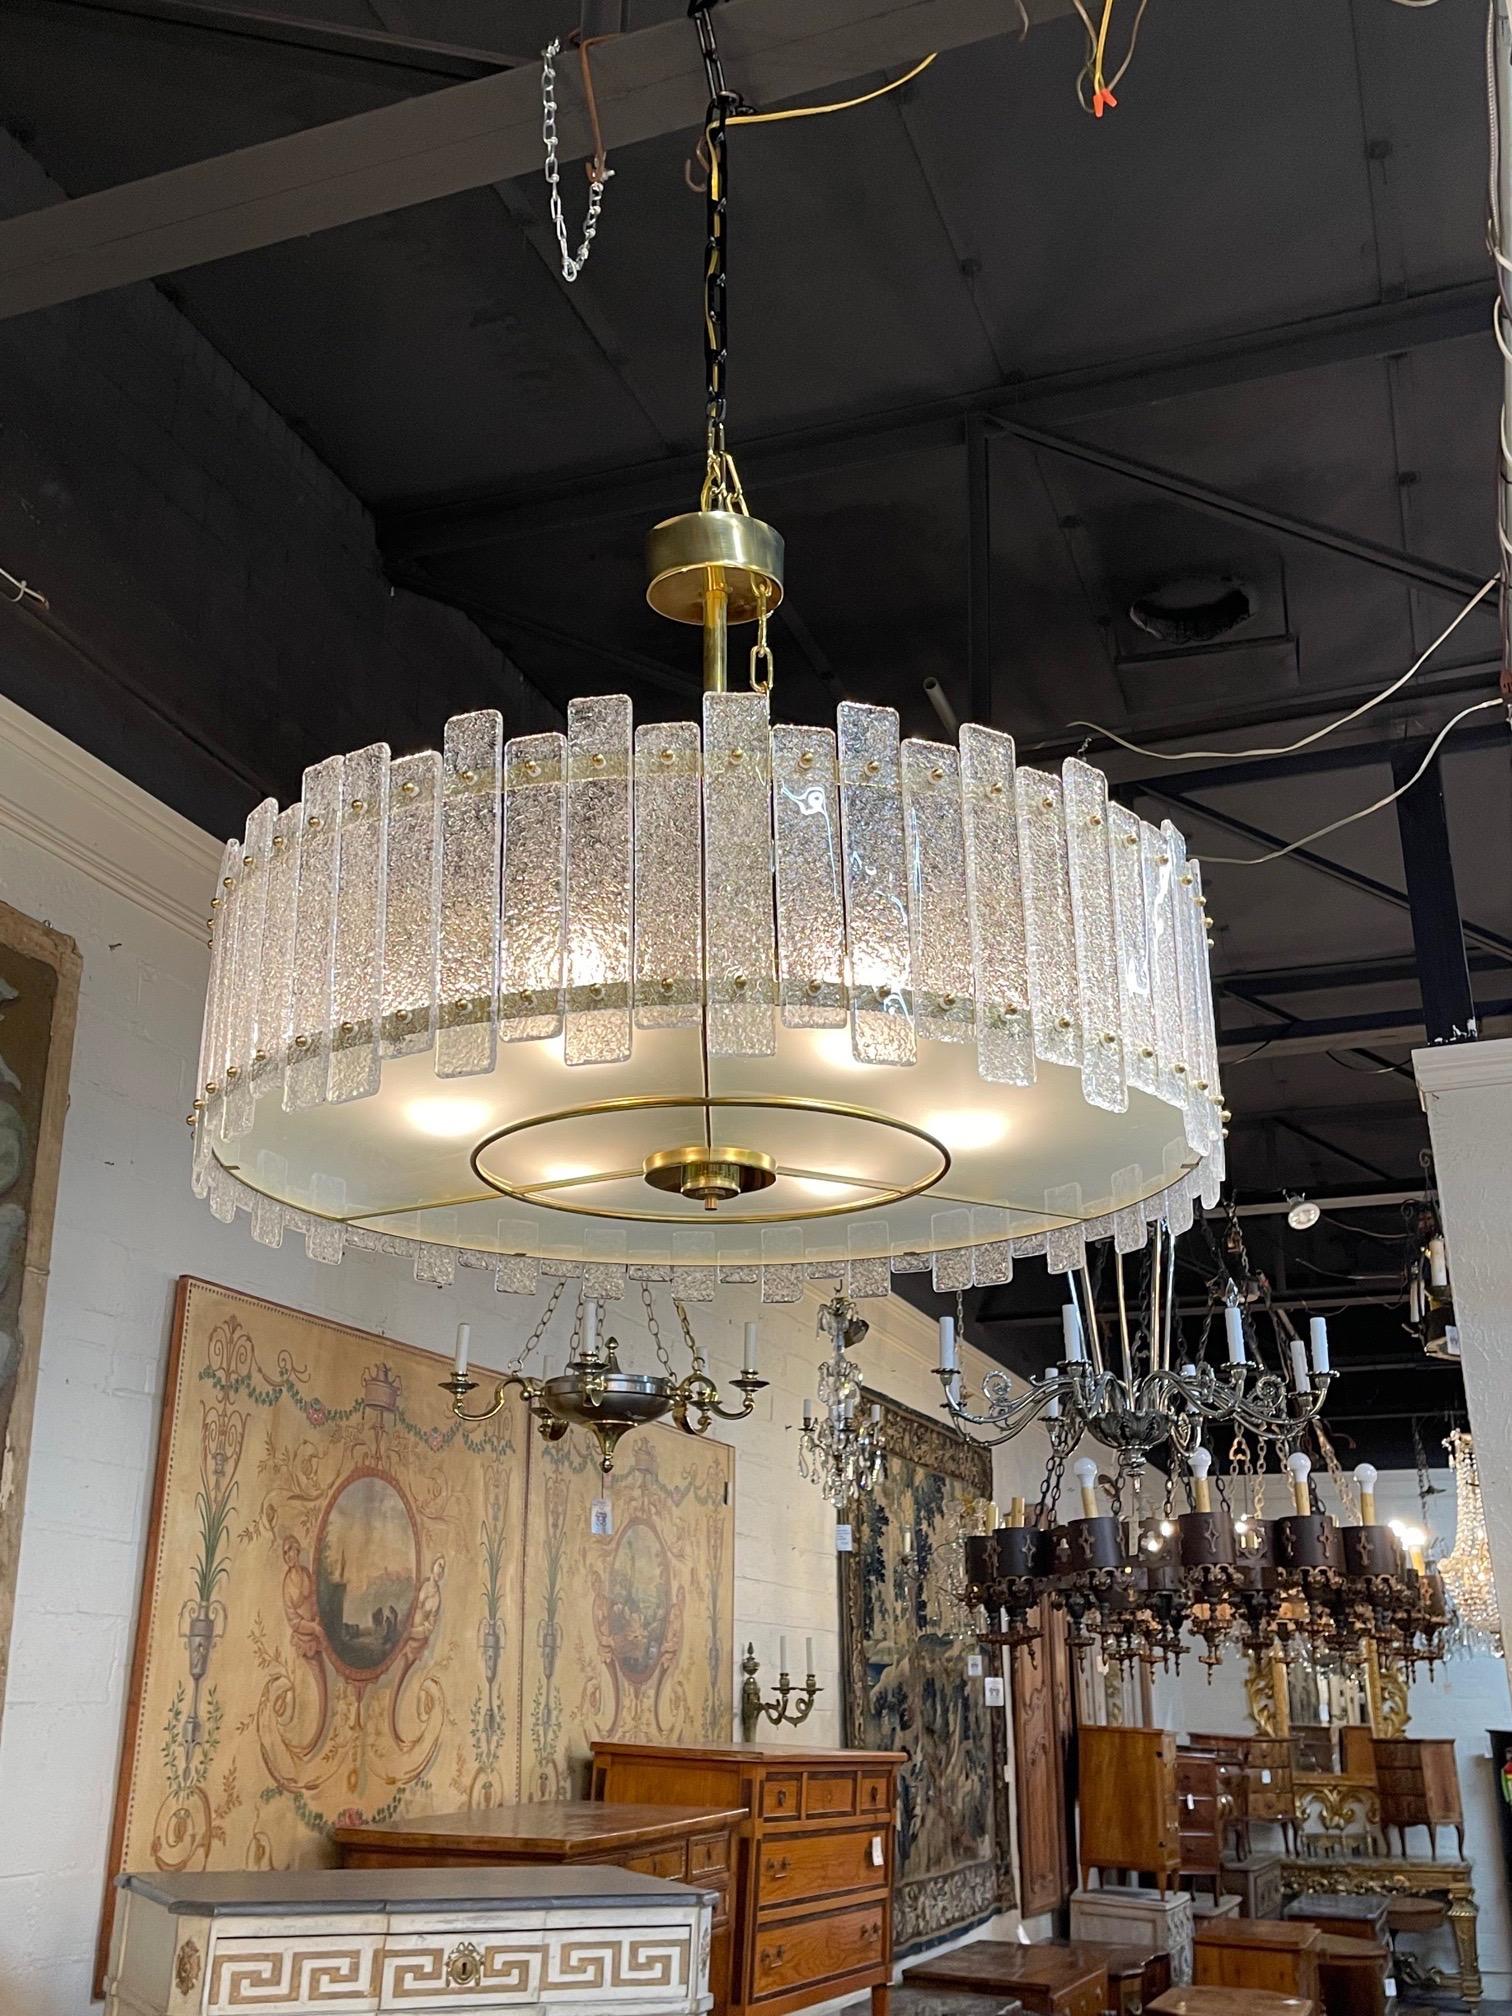 Exquisite shaped drum shaped modern Murano glass and brass chandelier. Beautiful textured glass on a decorative base. So pretty and stylish!!